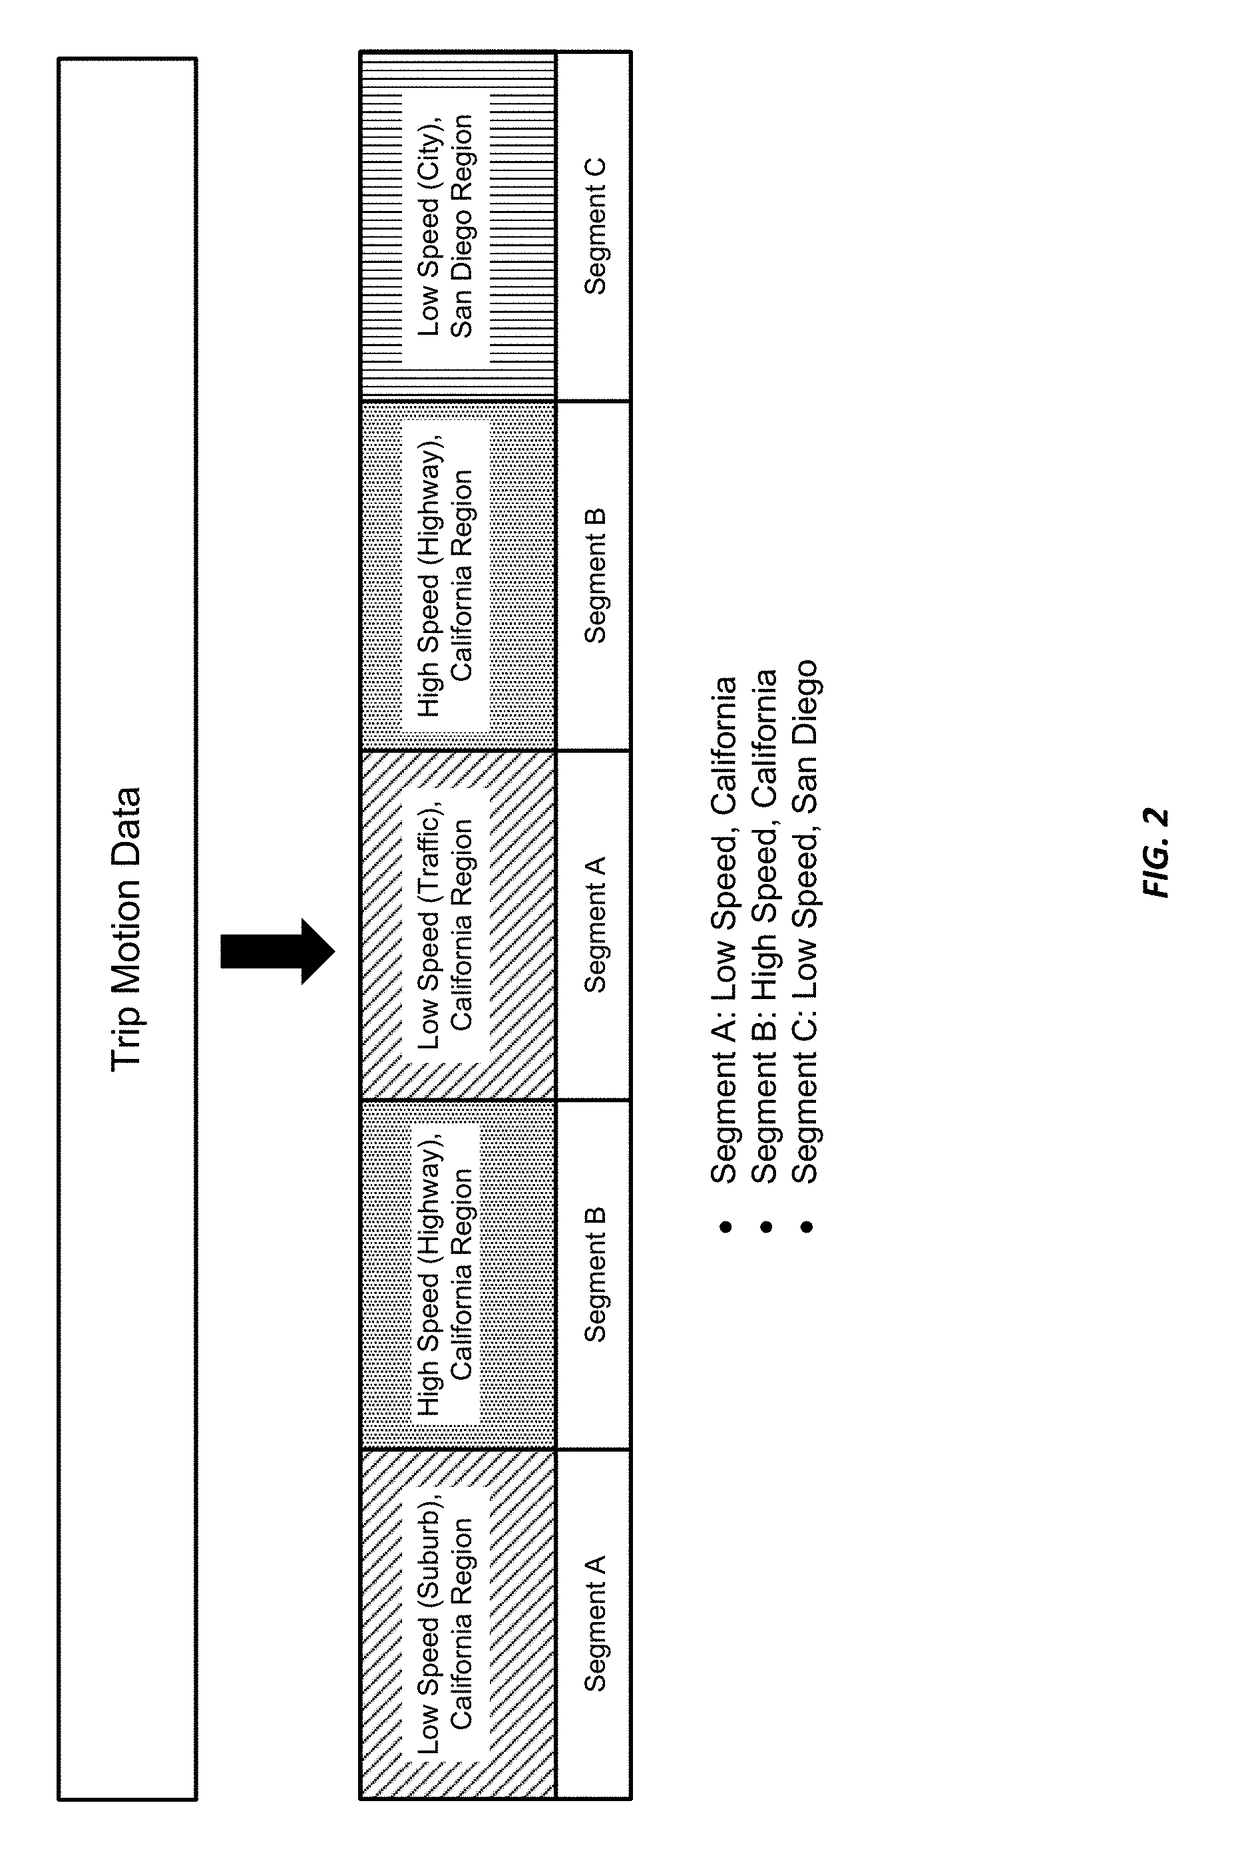 System and methods for relative driver scoring using contextual analytics